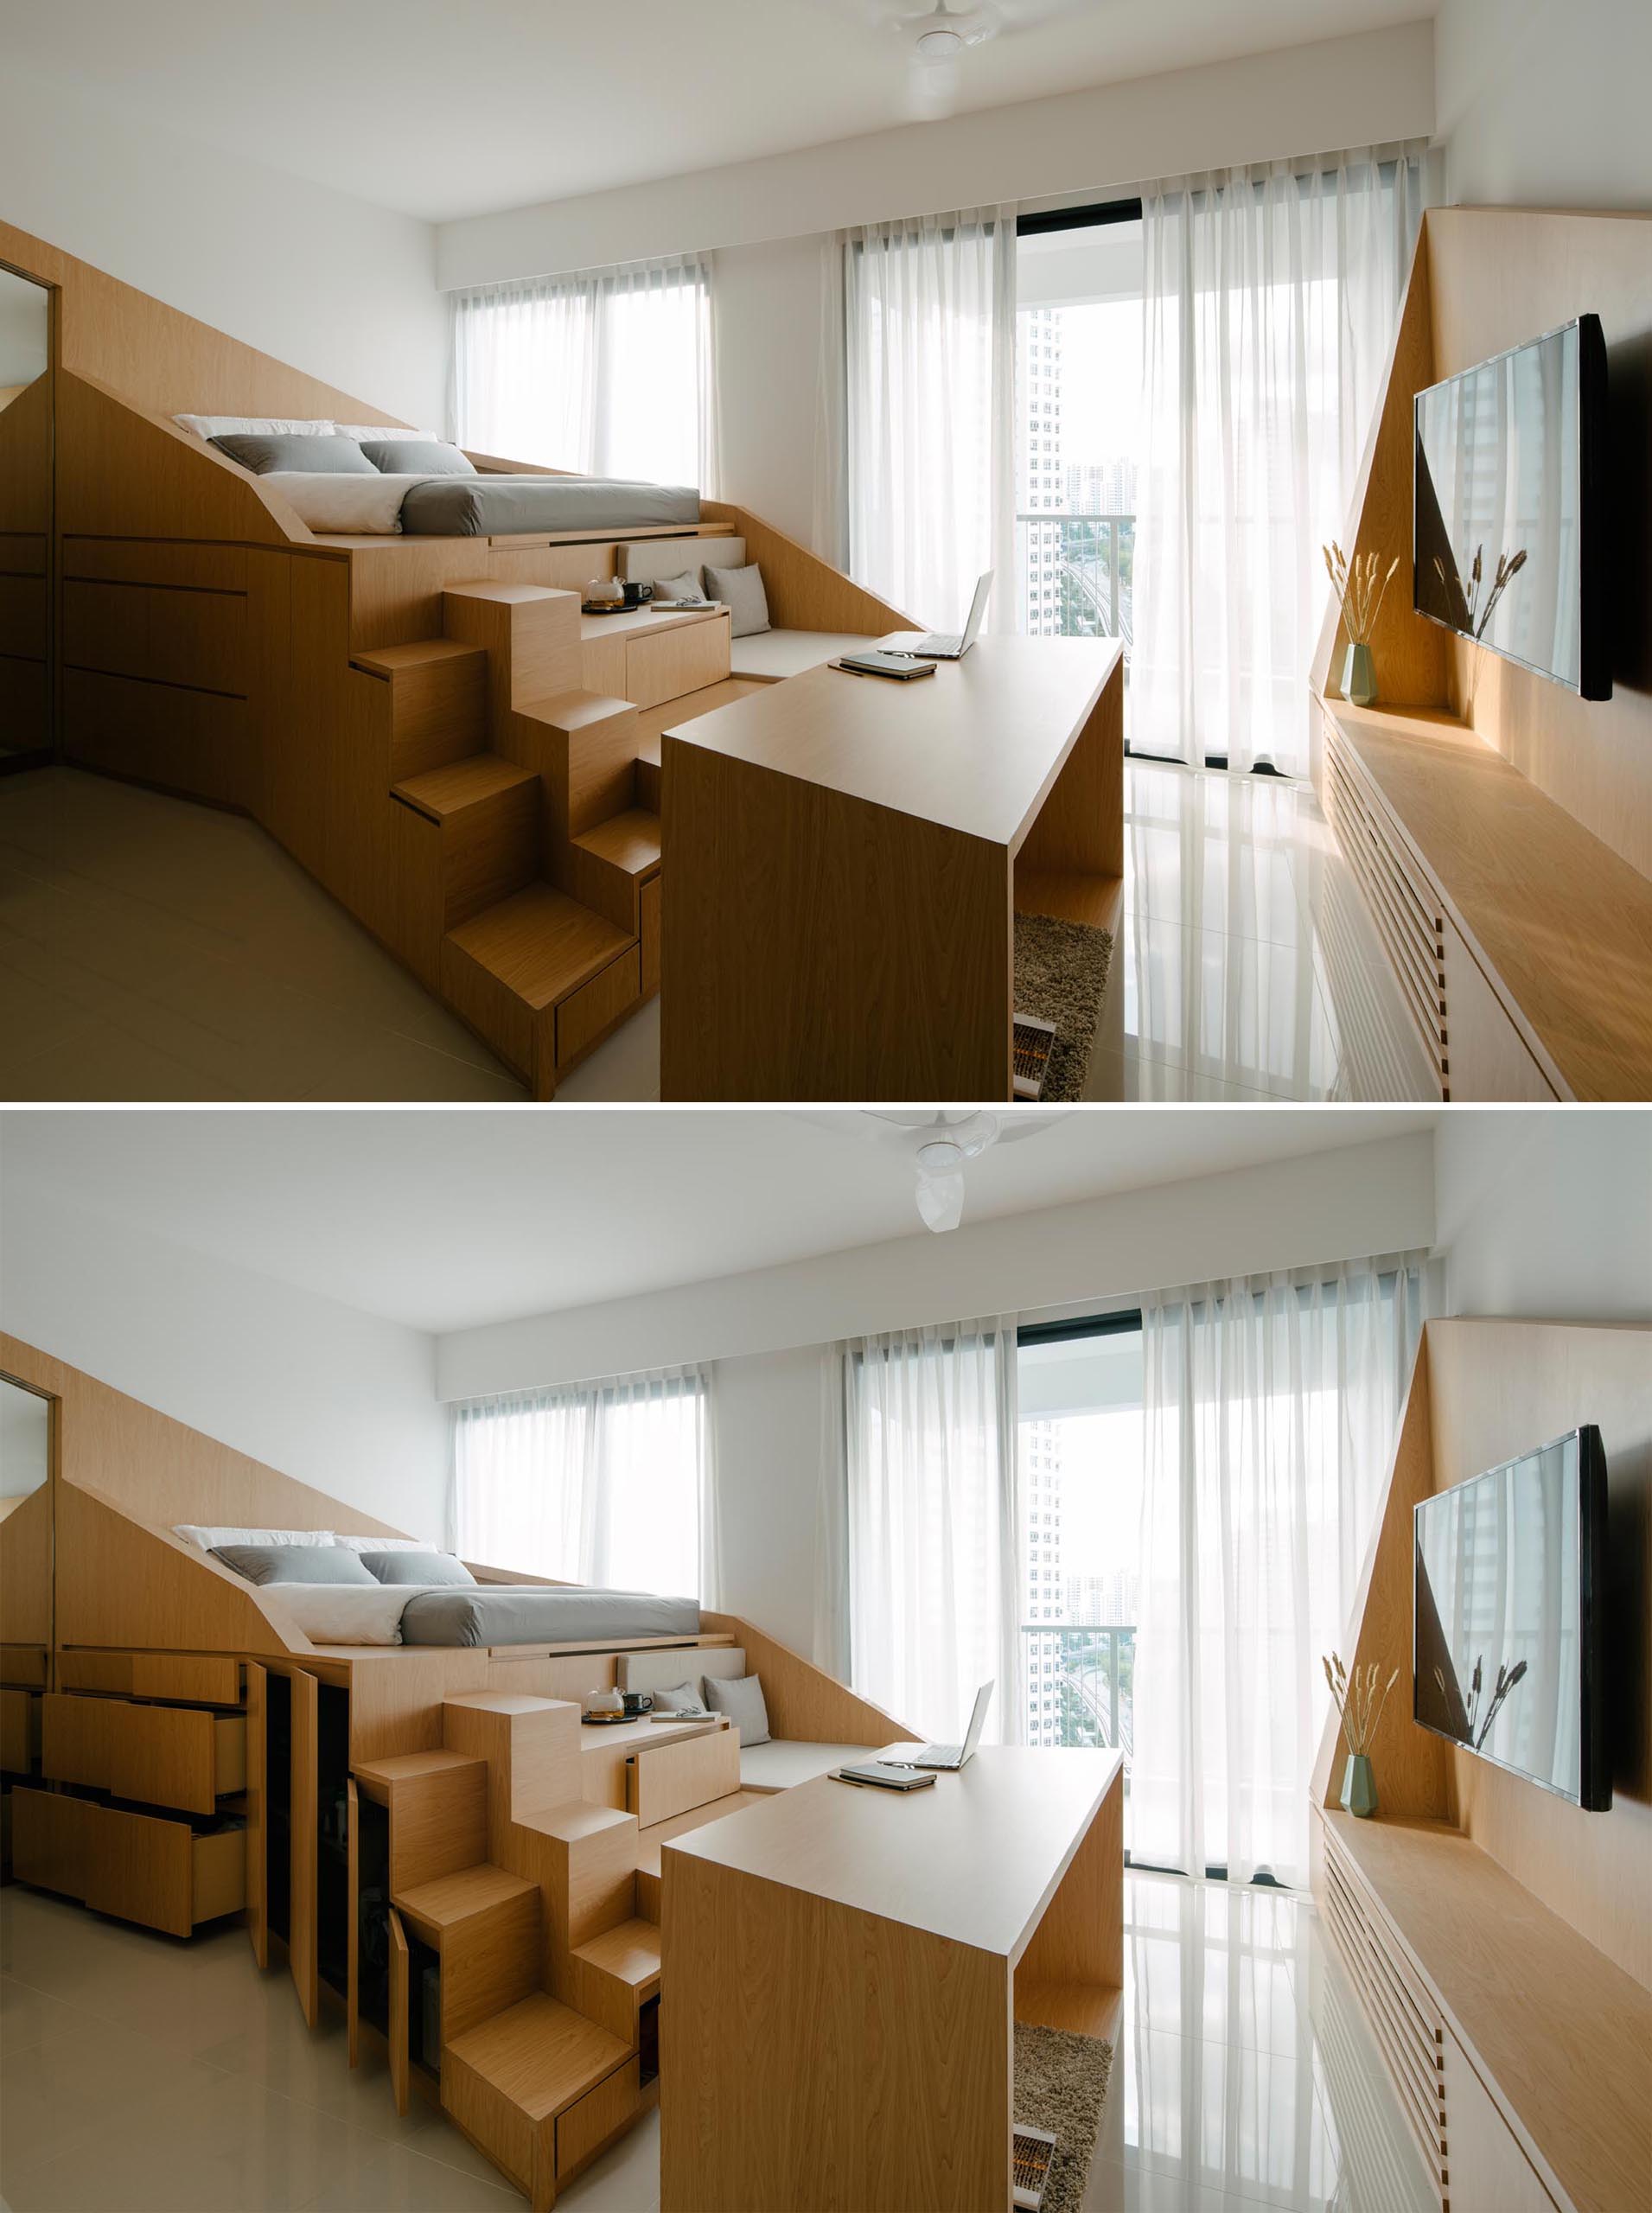 A custom design loft bed with a sofa and storage, has integrated steps up to the bed.